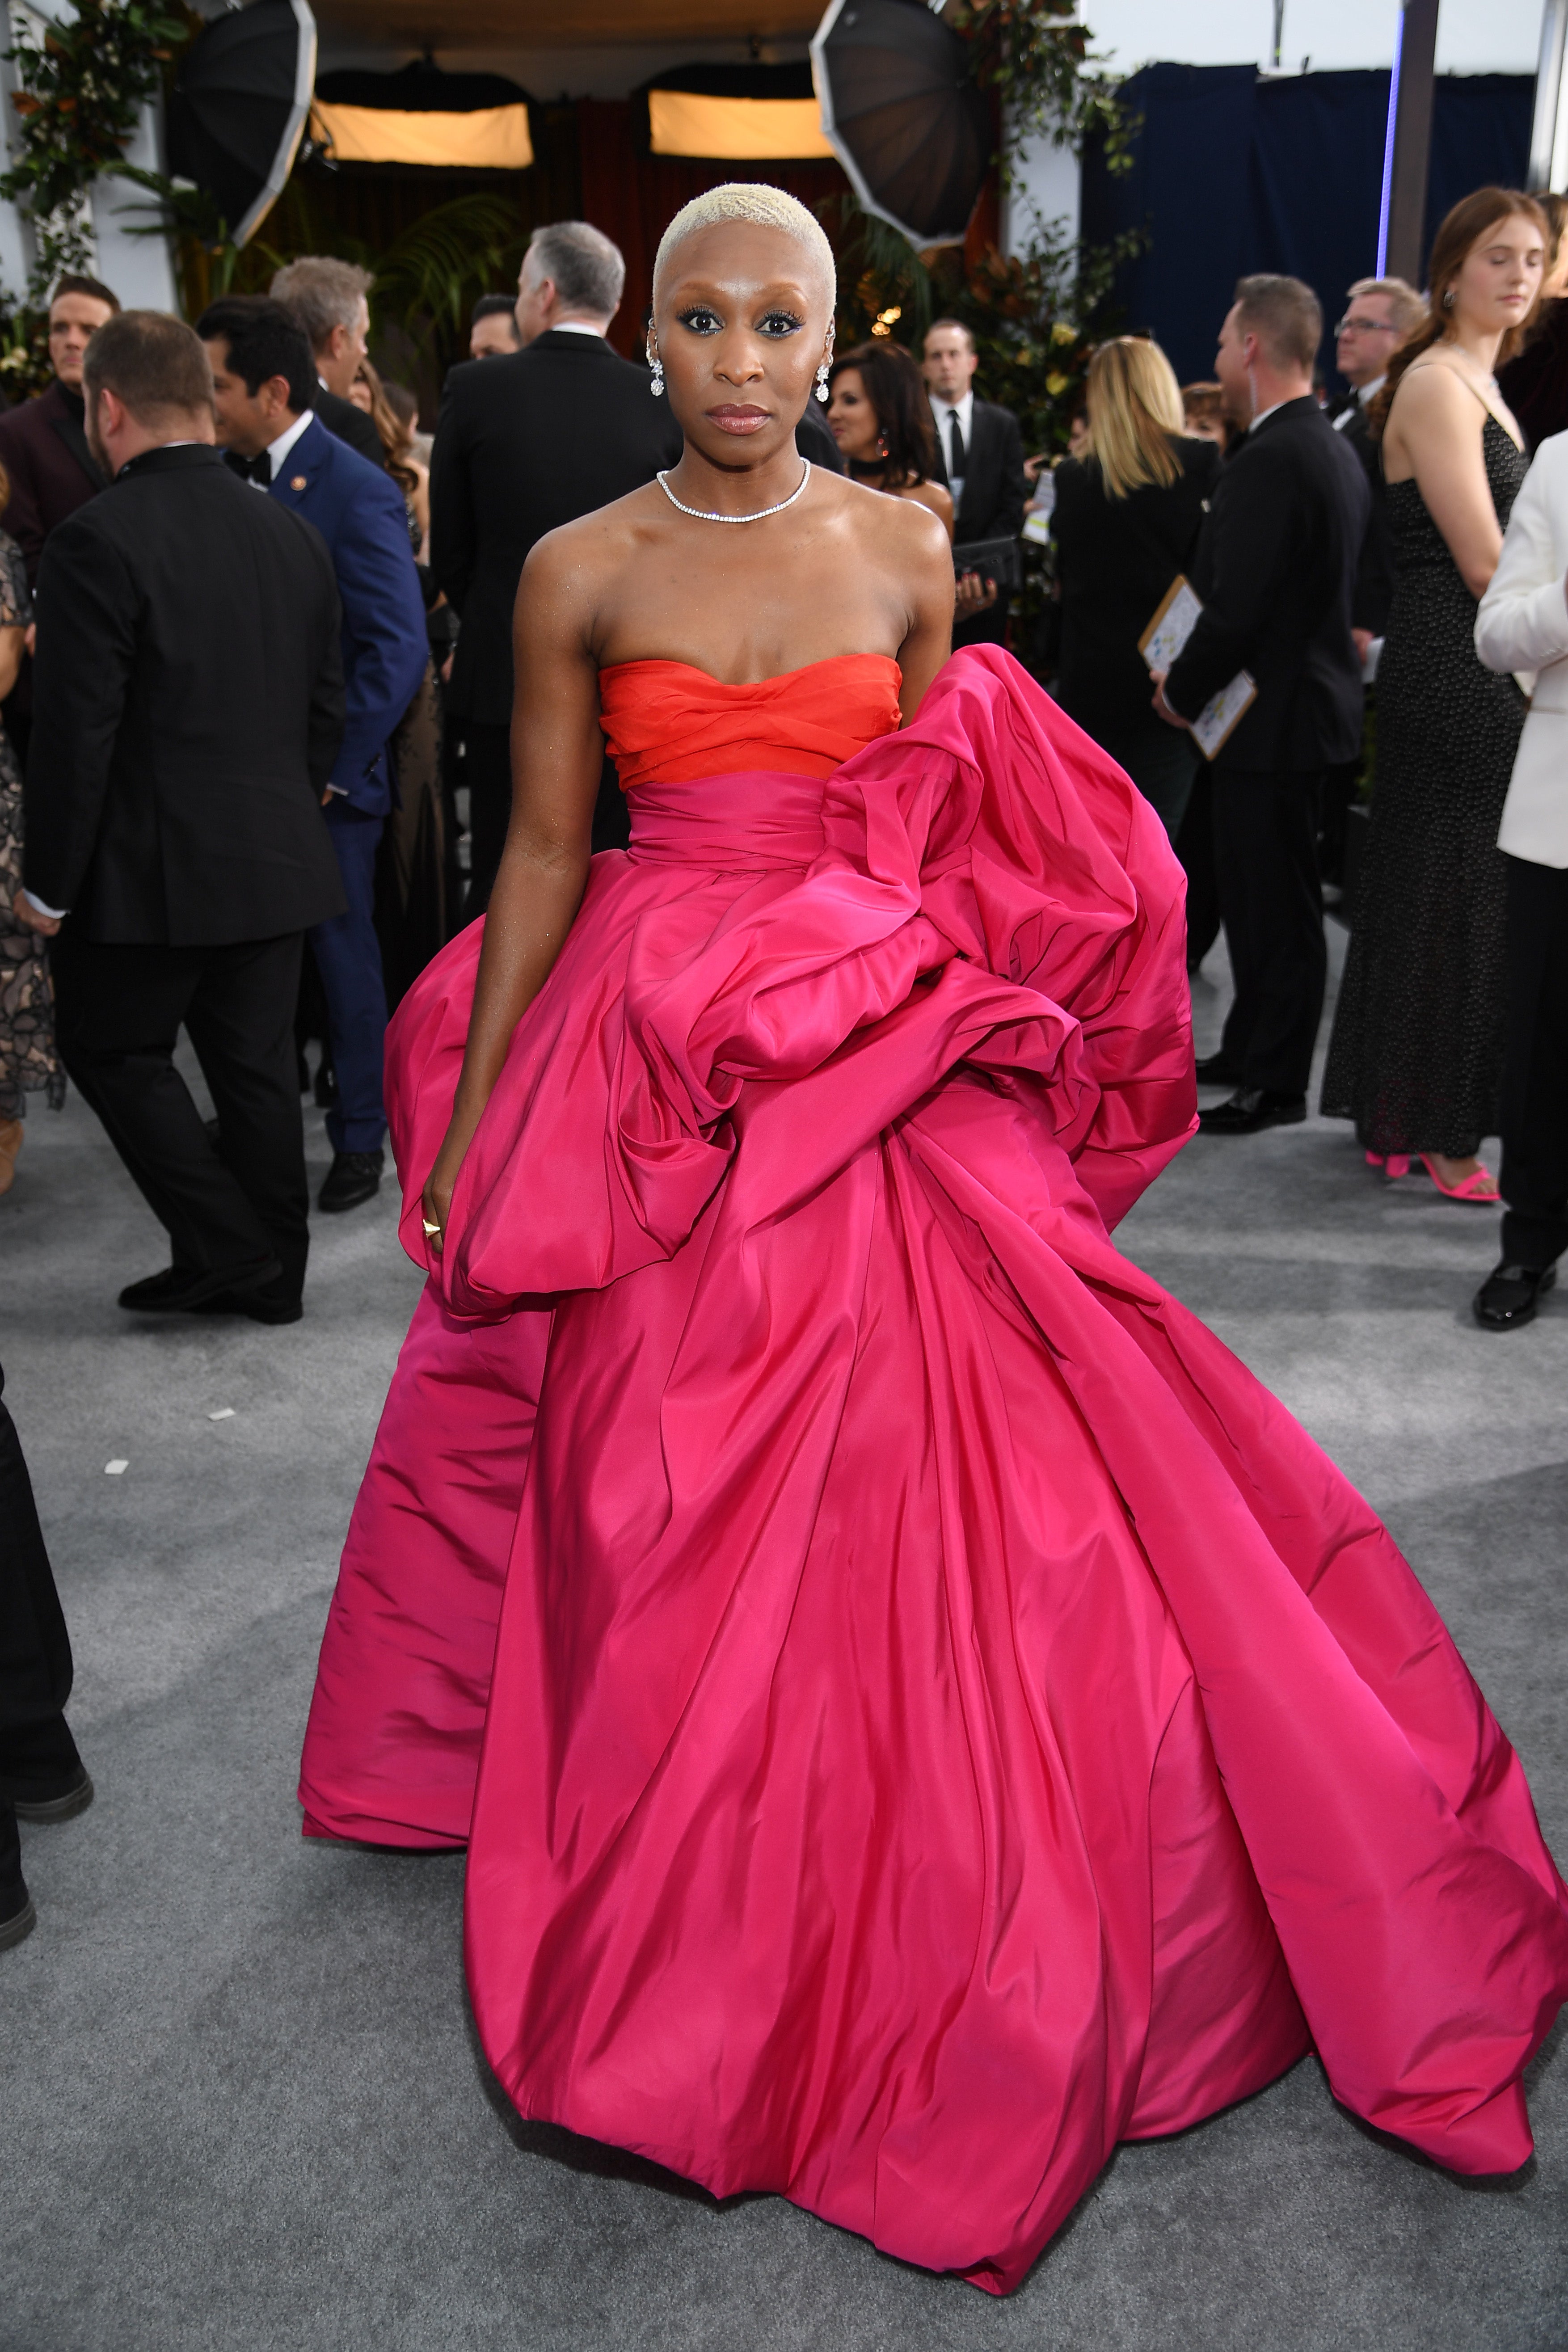 SAG Awards 2020 Red Carpet: See All The Best Fashion Moments